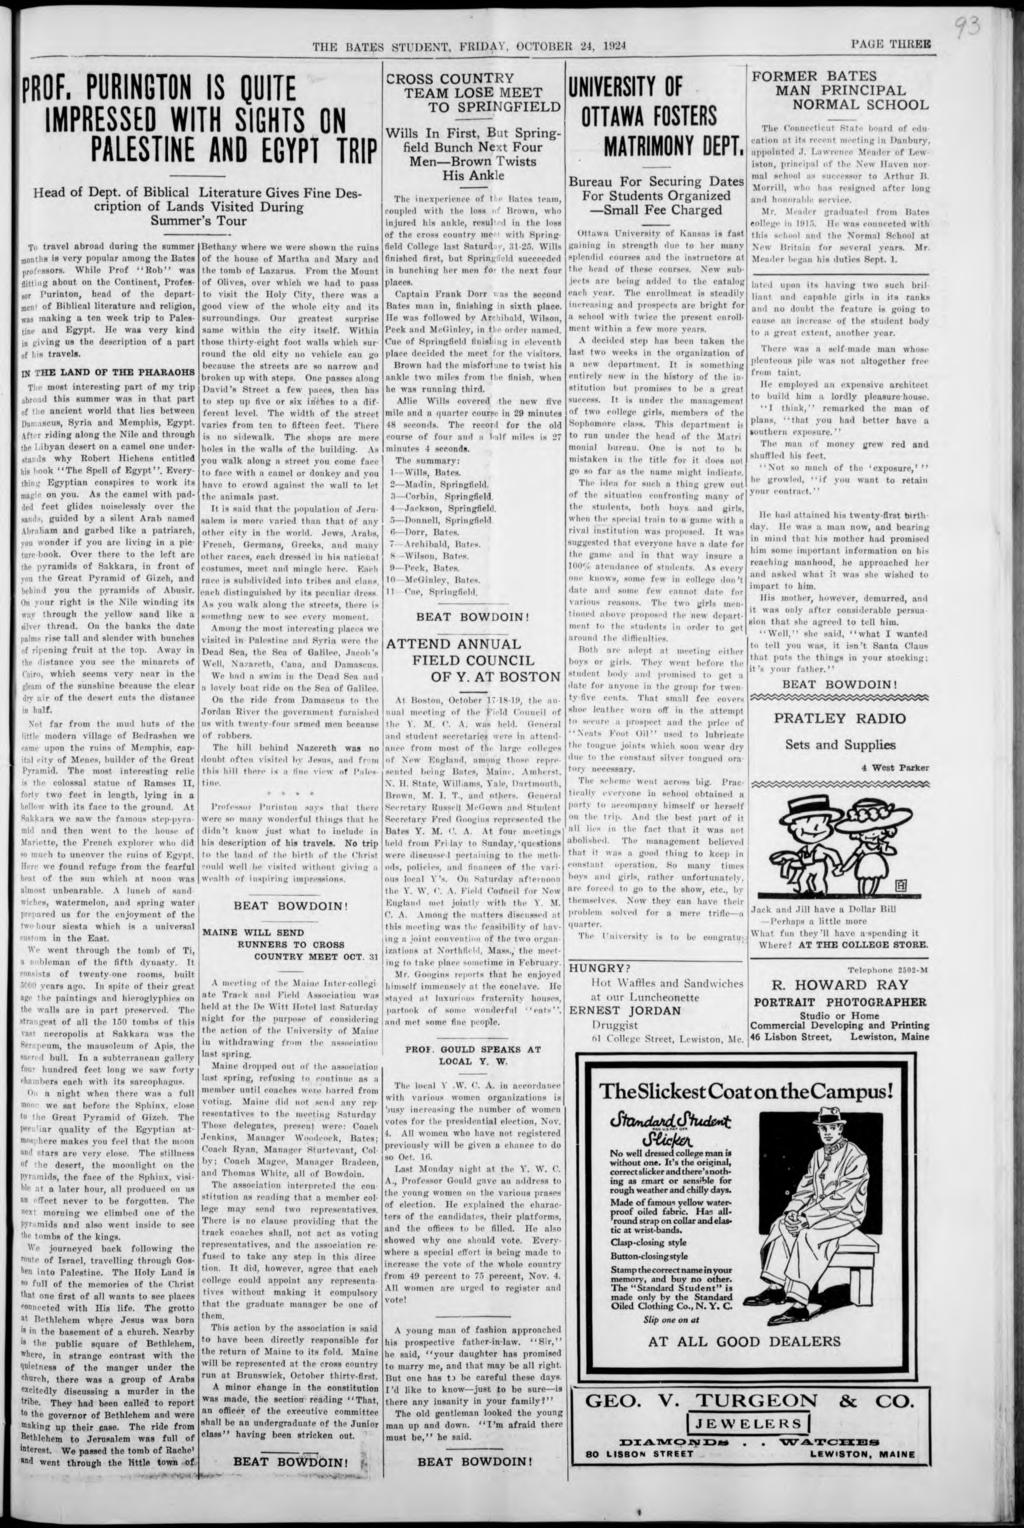 ' THE BATES STUDENT, FRIDAY, OCTOBER 24, 1924 PAGE THREE PROF. PURINGTON IS QUITE IMPRESSED WITH SIGHTS ON PALESTINEJND EGYPT TRIP Head of Dept.